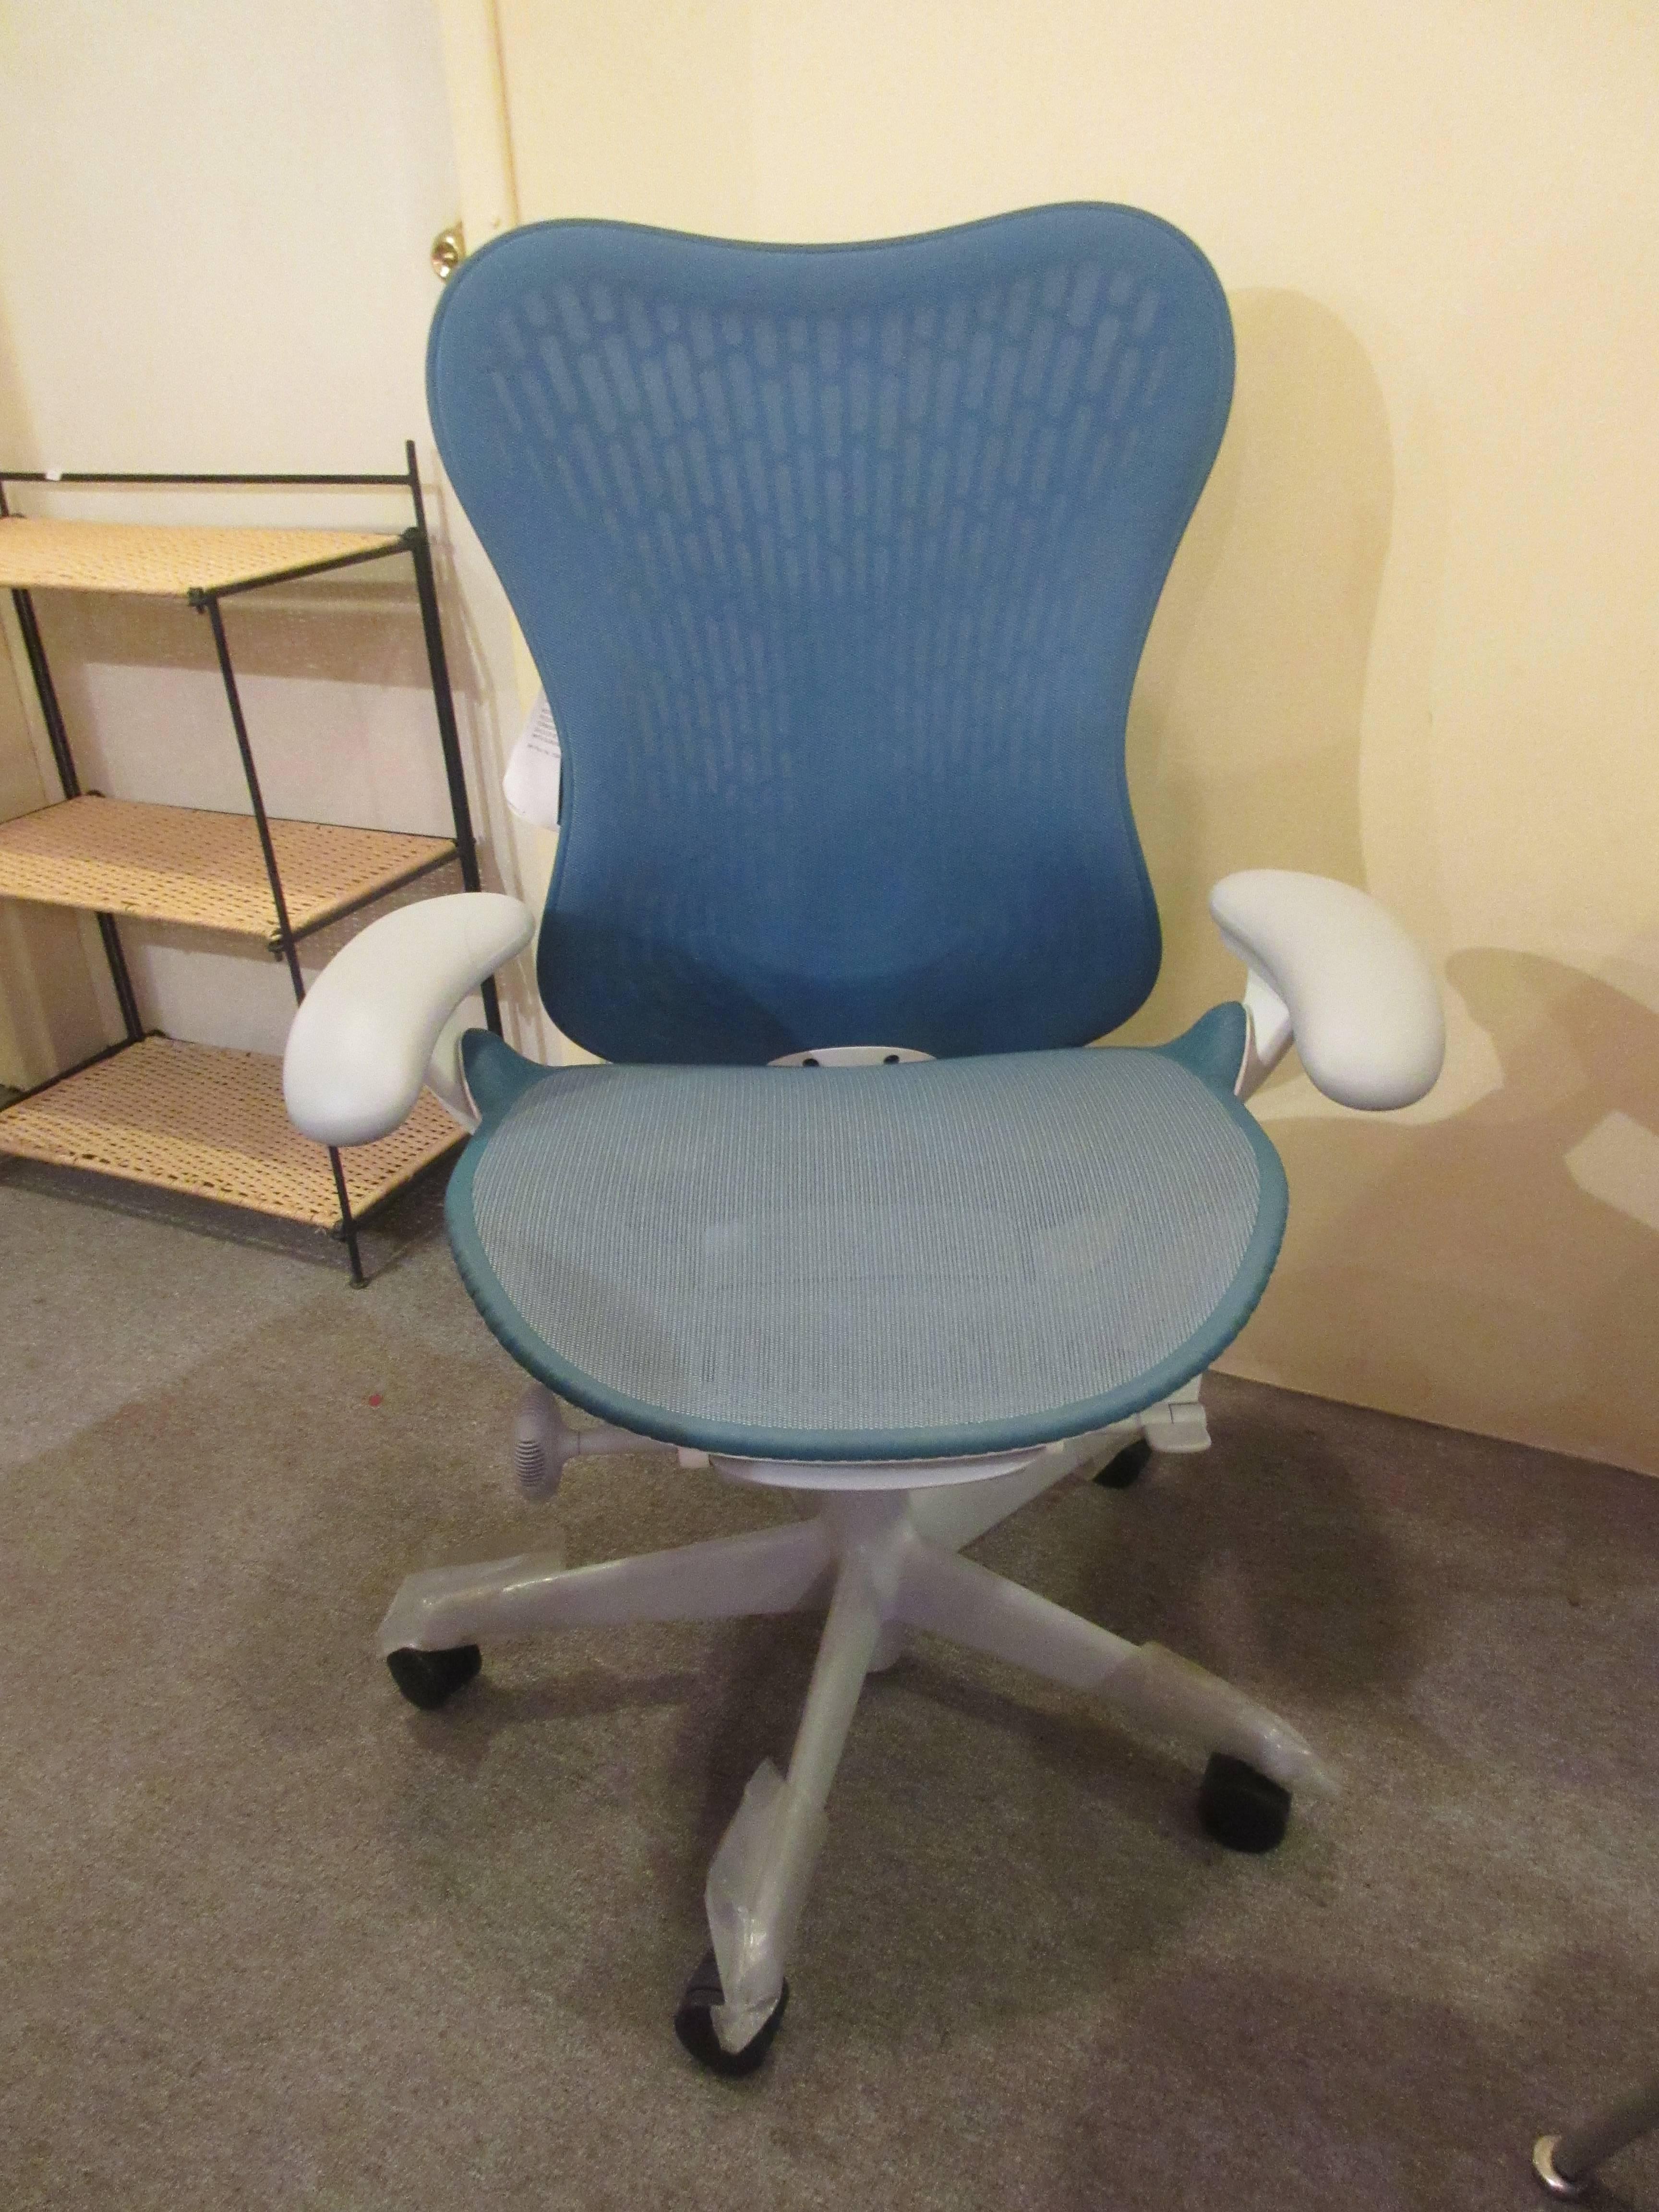 After almost 20 years association with Herman Miller we have severed our relationship and this is the last of our floor models. It has all the bells and whistles available on the Mira 2 series (tilt limiter, adjustable lumbar, flex front seat depth,